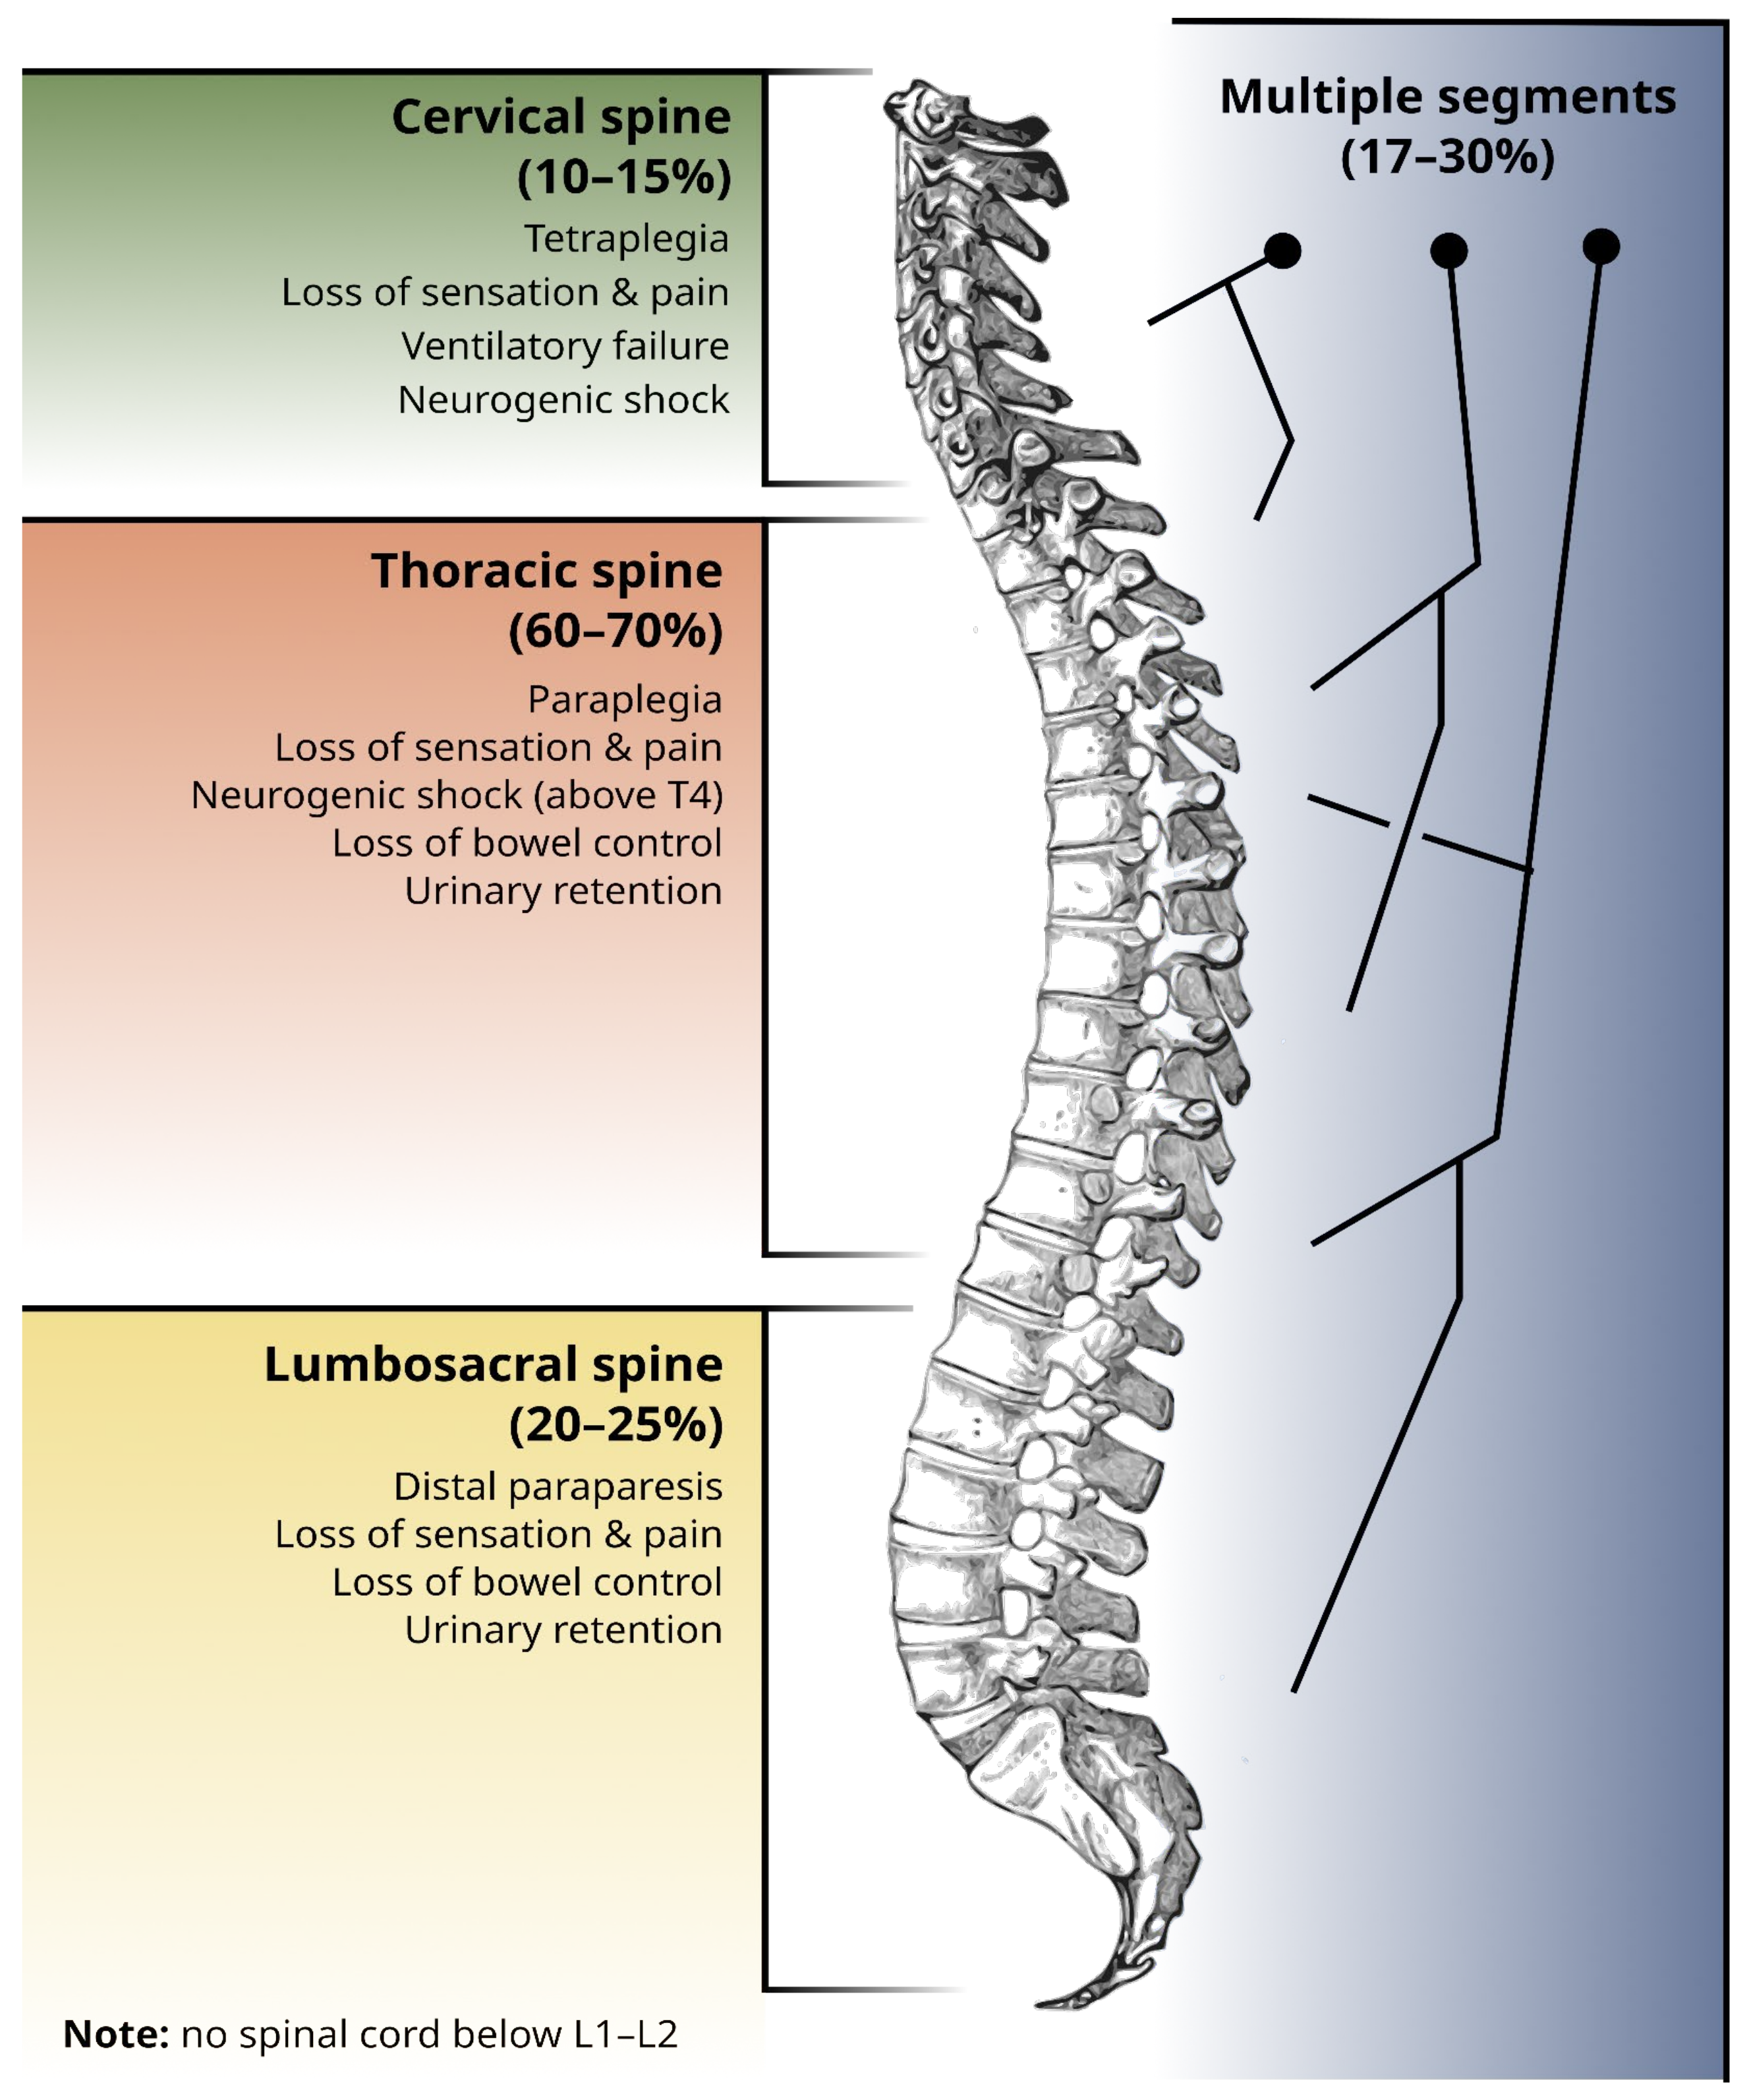 The vertebral compression ratio is calculated using the following